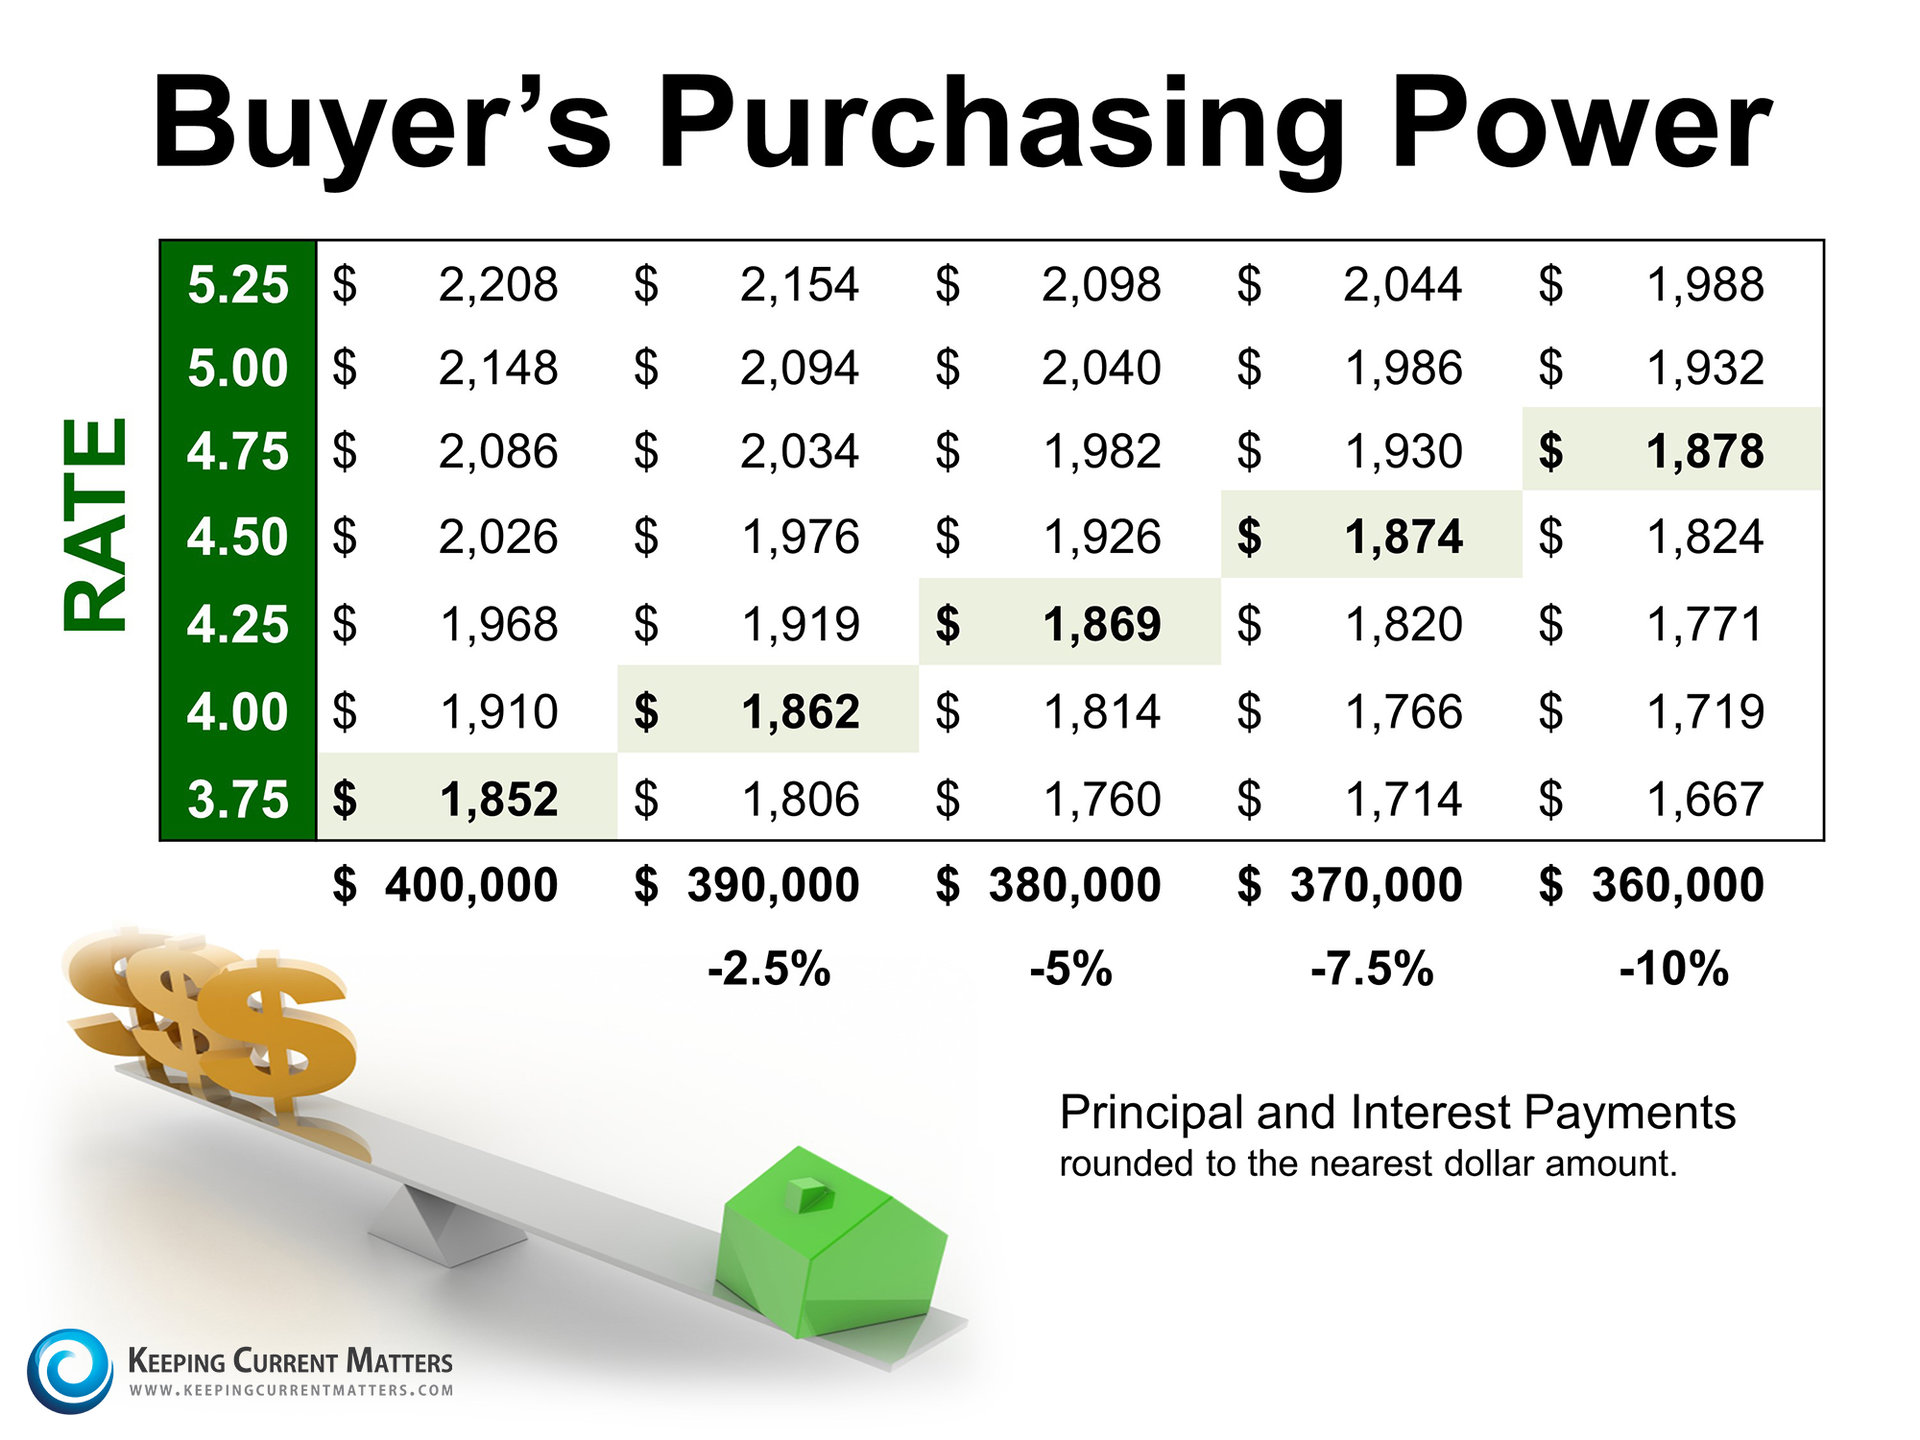 Buyer's Purchasing Power | Keeping Current Matters